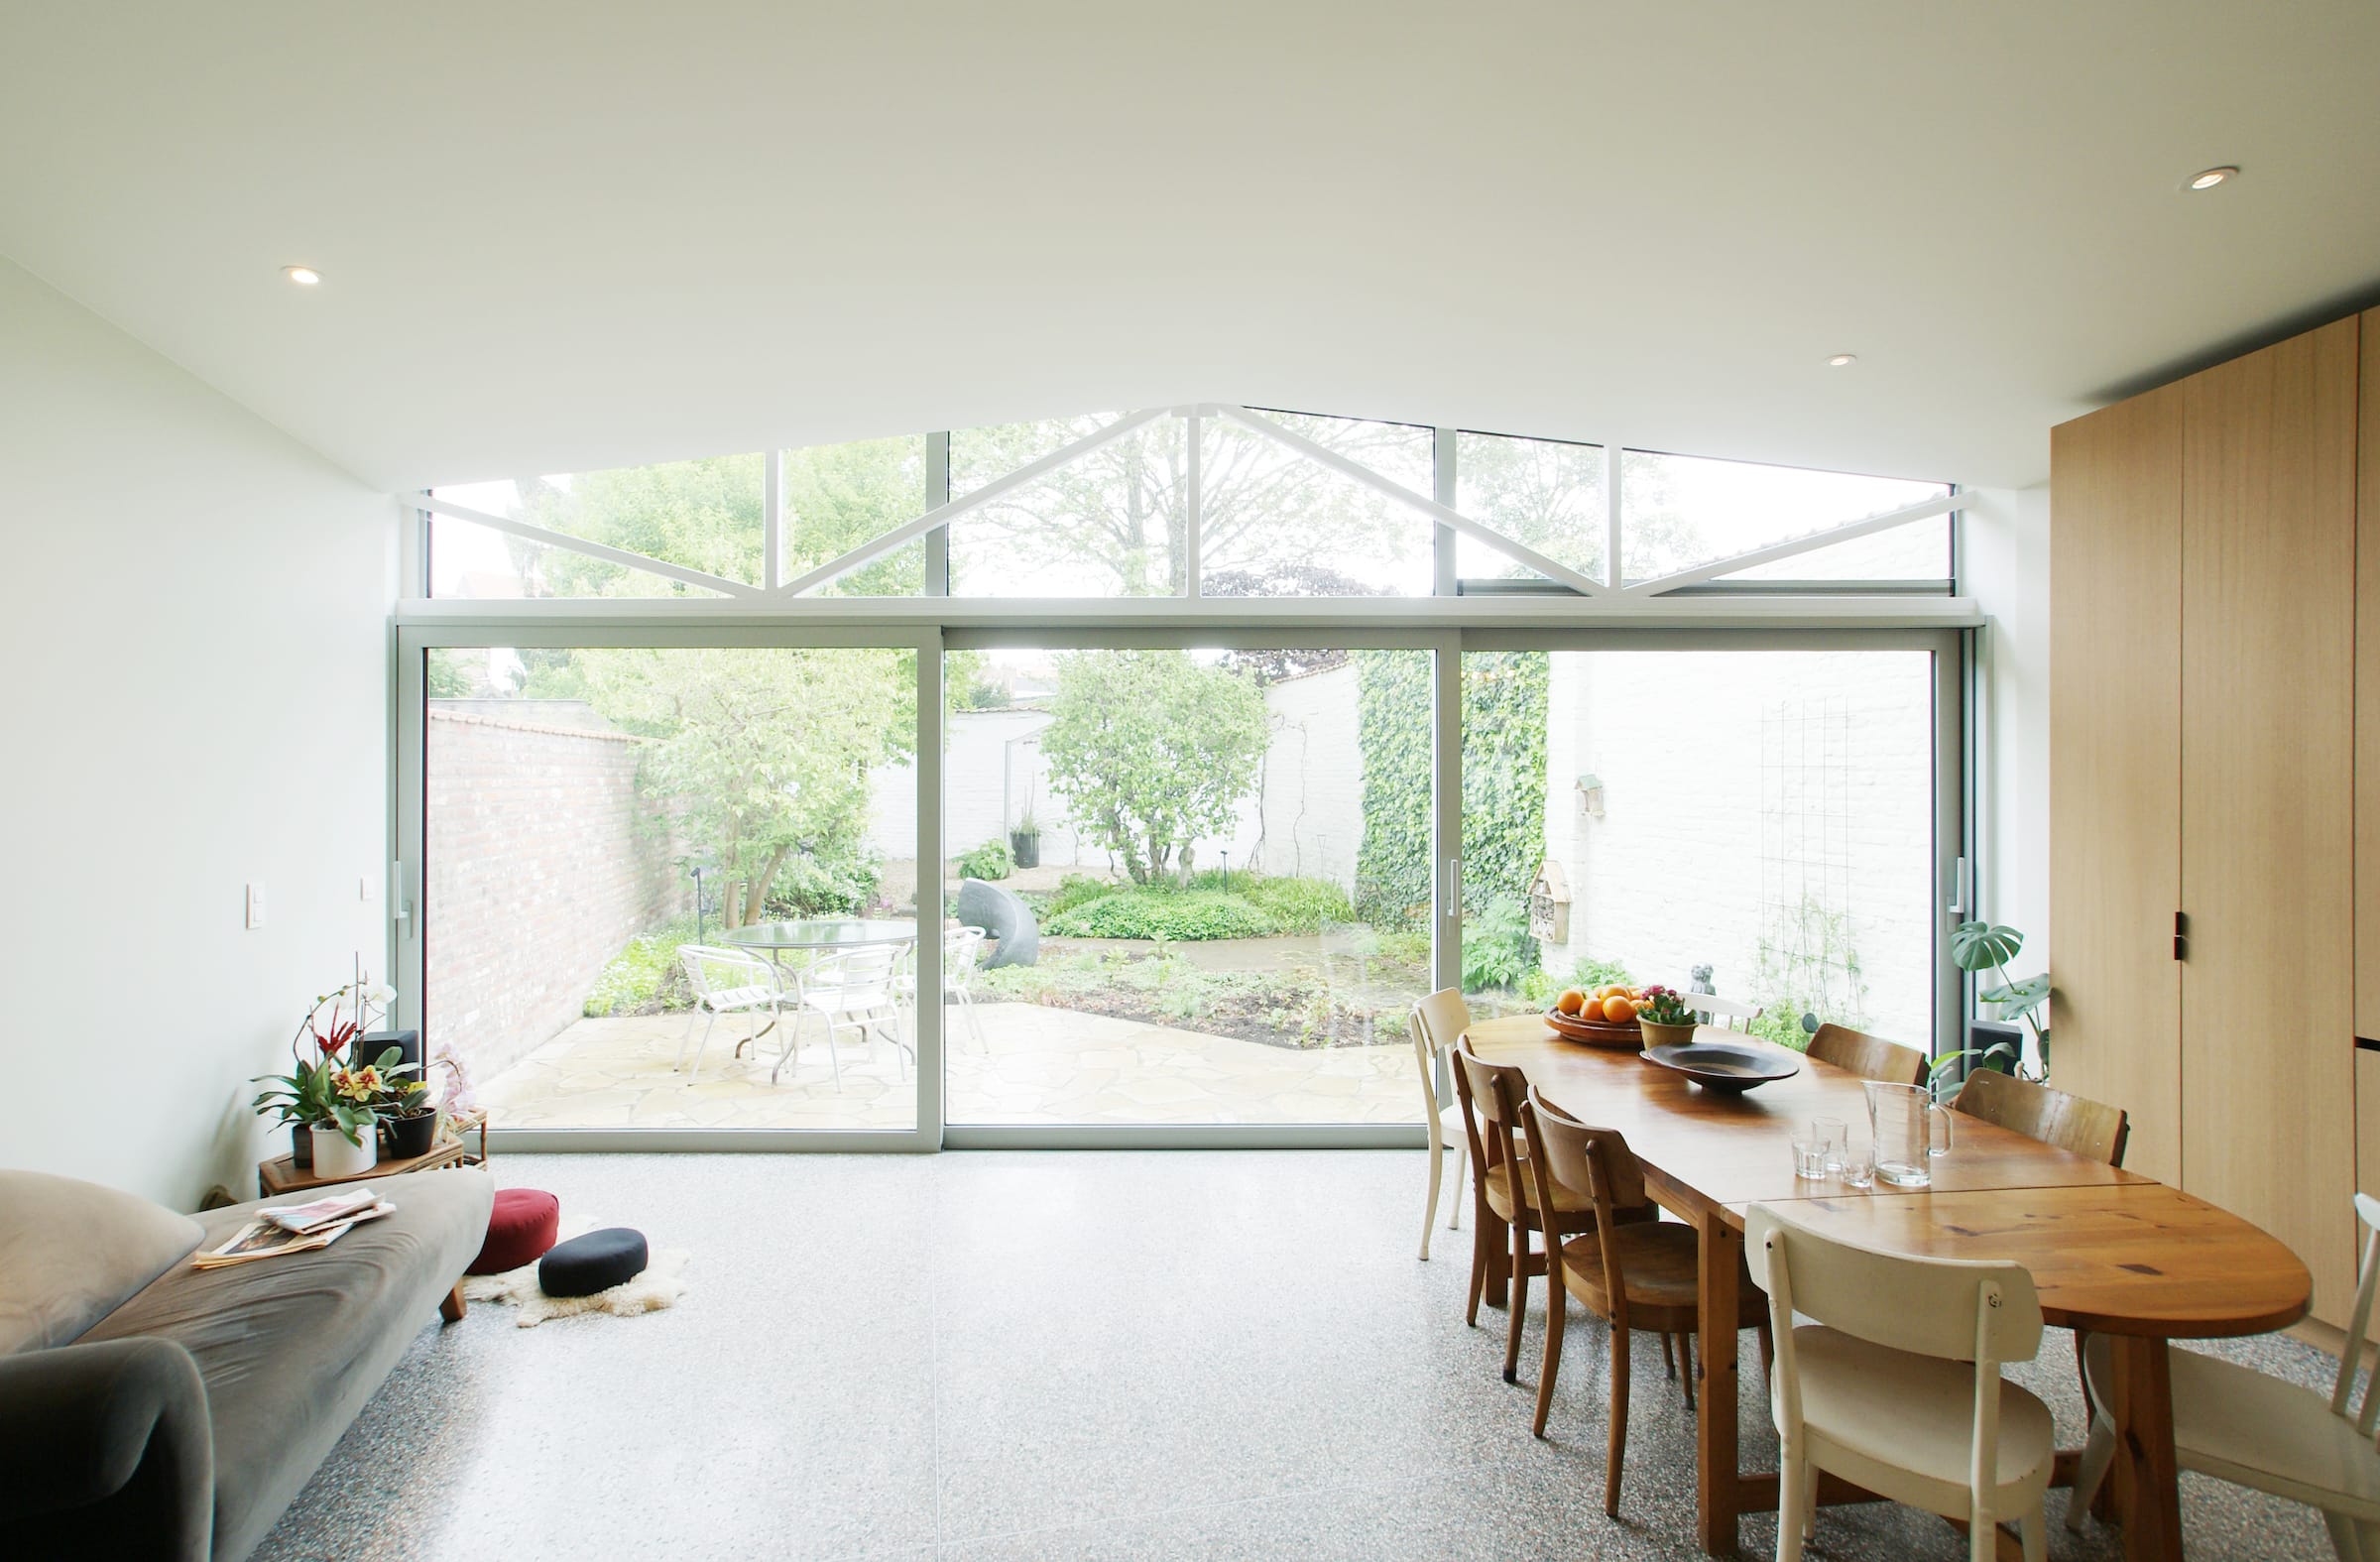 Reynaers MasterPatio sliding doors in white, designed into a white new house